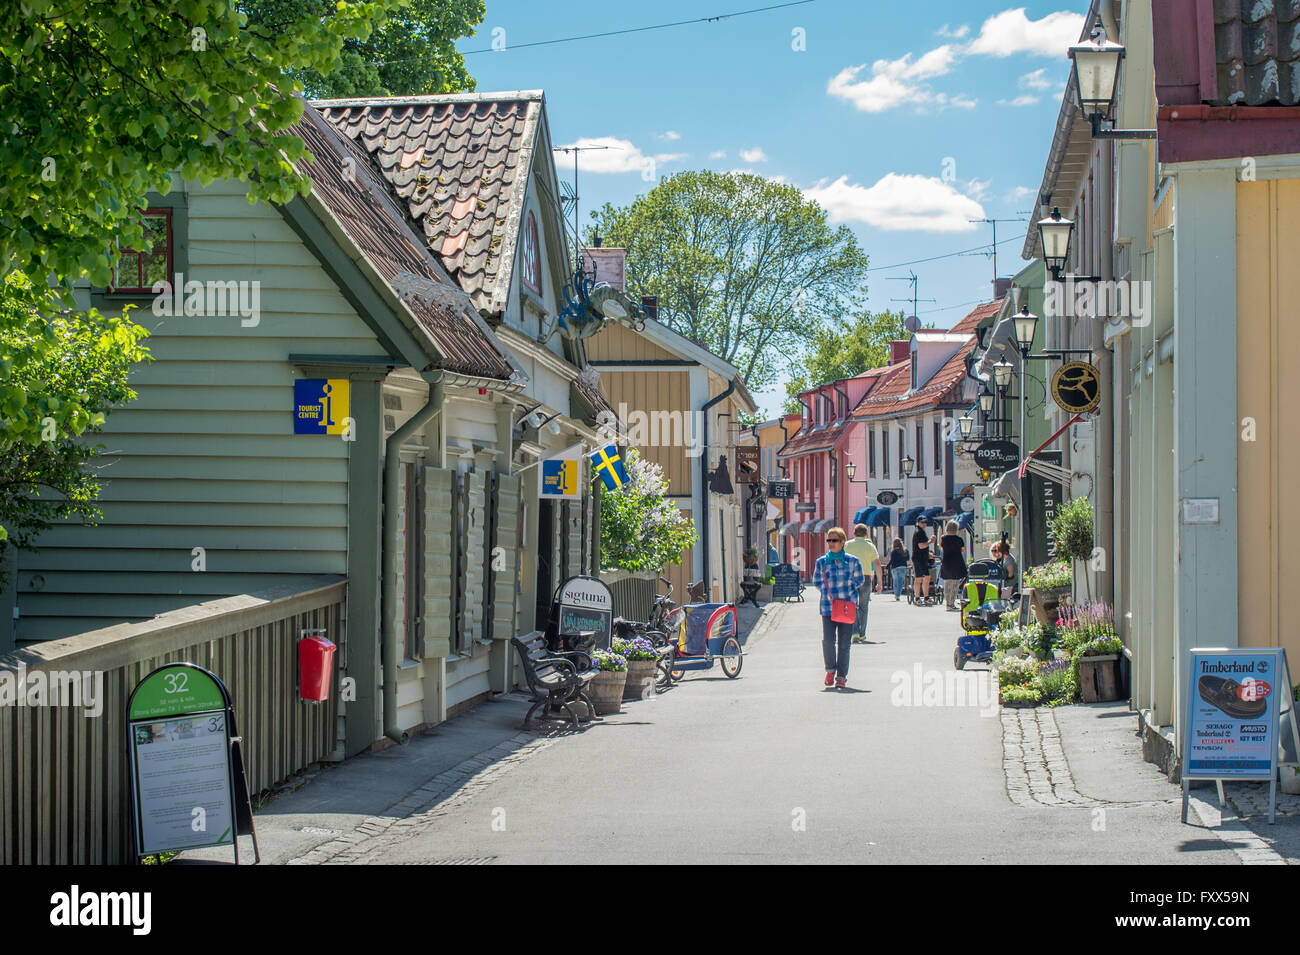 Sigtuna - the oldest town in Sweden Stock Photo